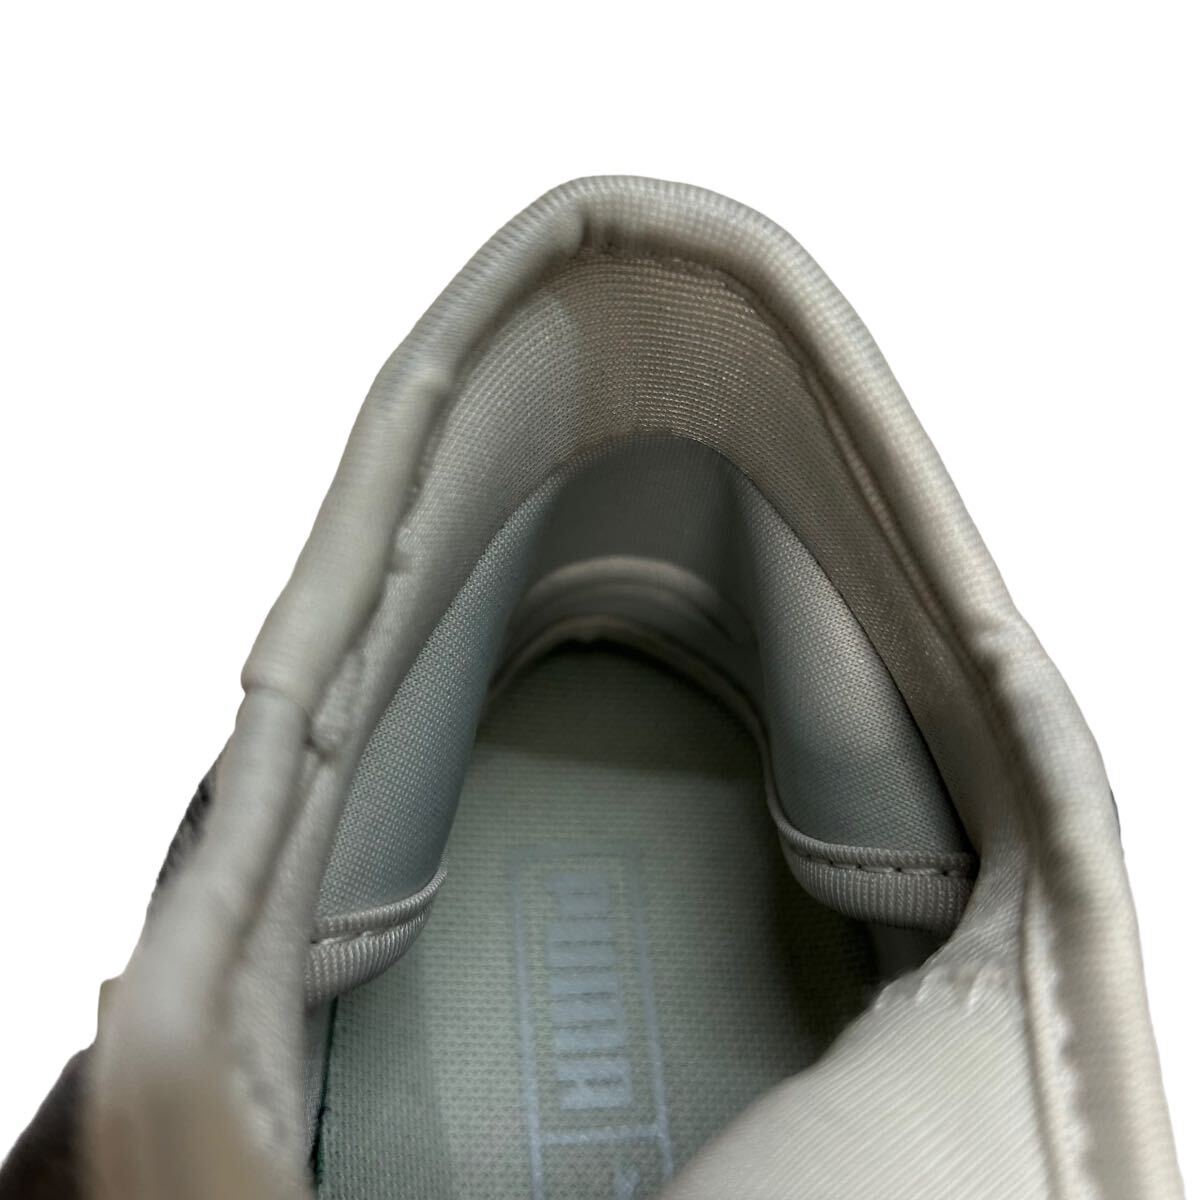 BD131 PUMA Puma Most ro sill sa lady's slip-on shoes sneakers US4.5 22.5cm gray excellent 